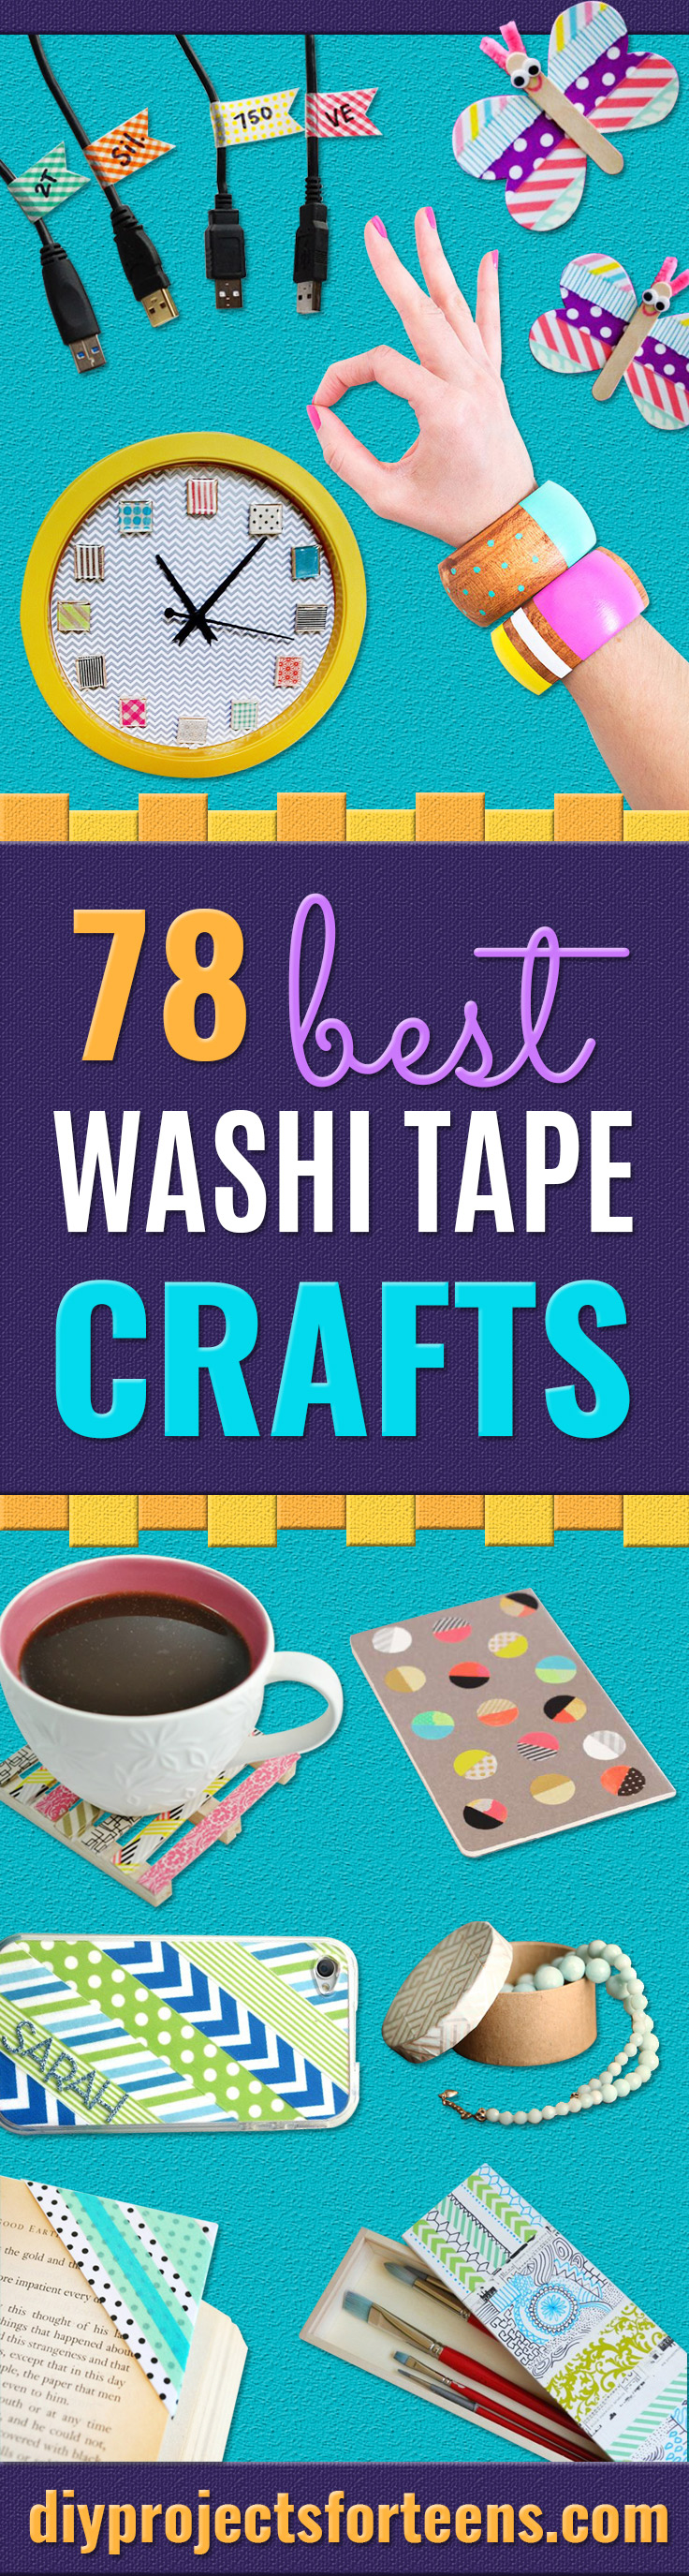 Washi Tape Crafts - Wall Art, Frames, Cards, Pencils, Room Decor and DIY Gifts, Back To School Supplies - Creative, Fun Craft Ideas for Teens, Tweens and Teenagers - Step by Step Tutorials and Instructions #washitape #crafts #cheapcrafts #teencrafts